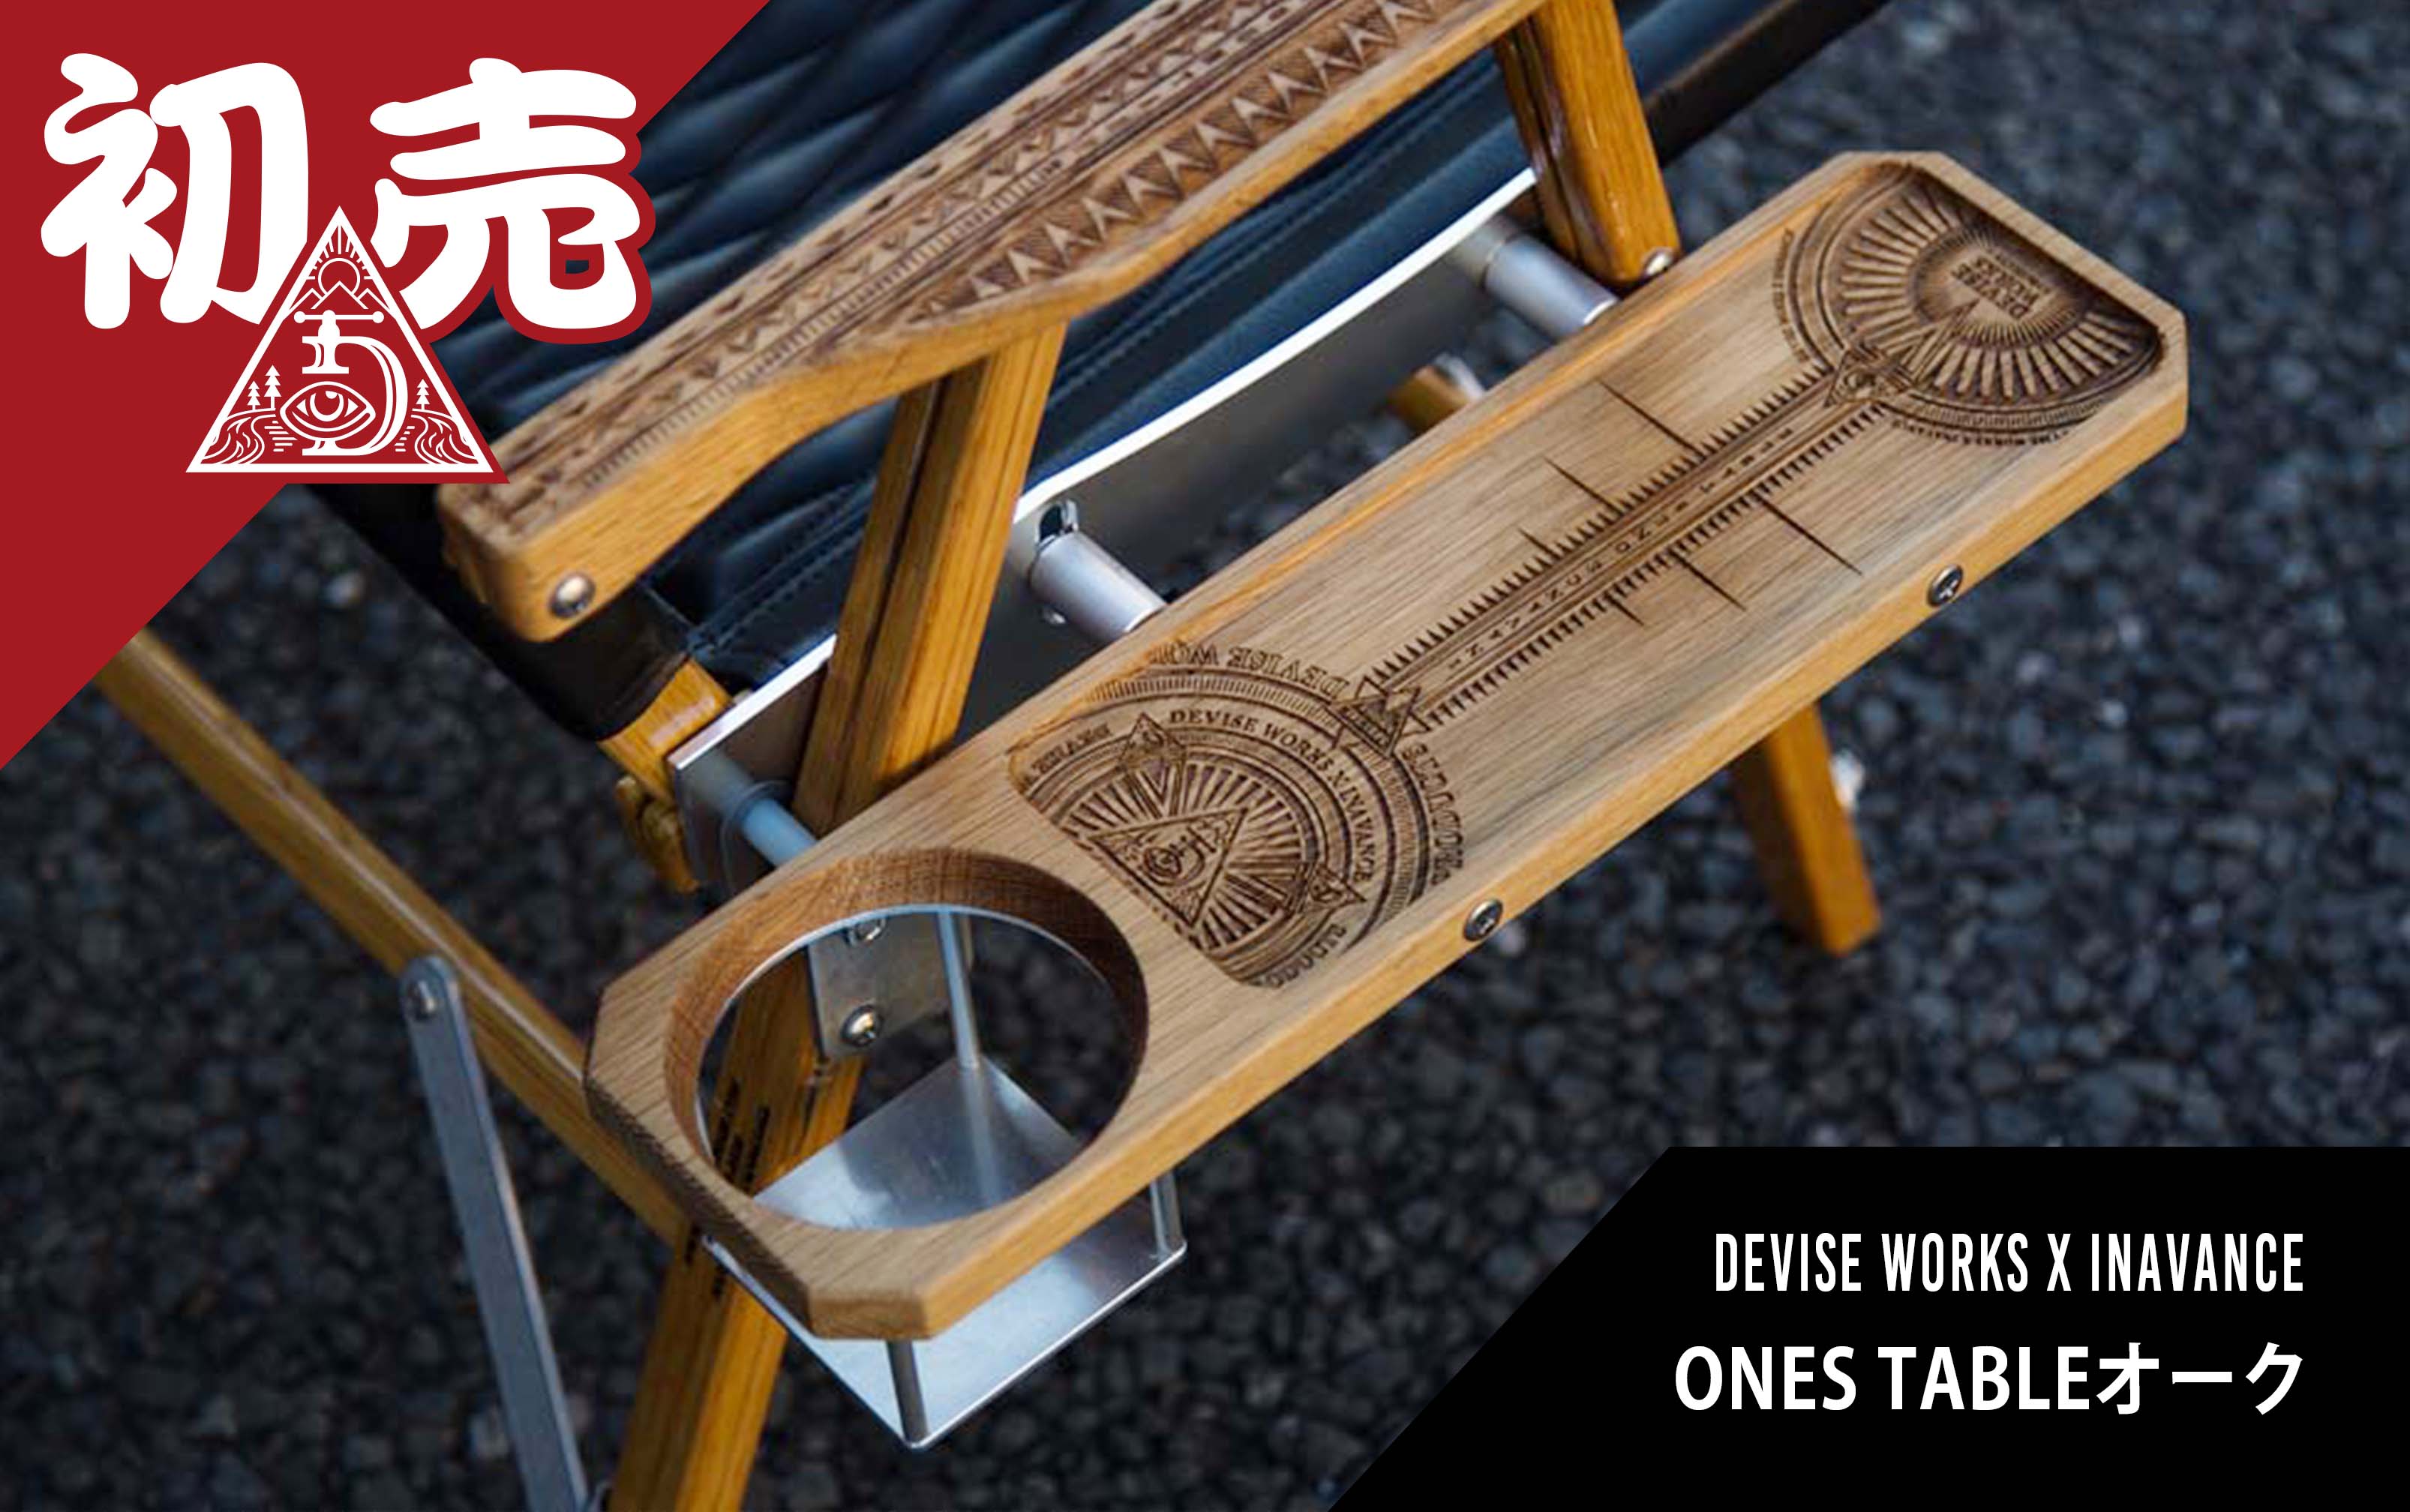 DEVISE WORKS x INAVANCE ONES TABLE | legaleagle.co.nz